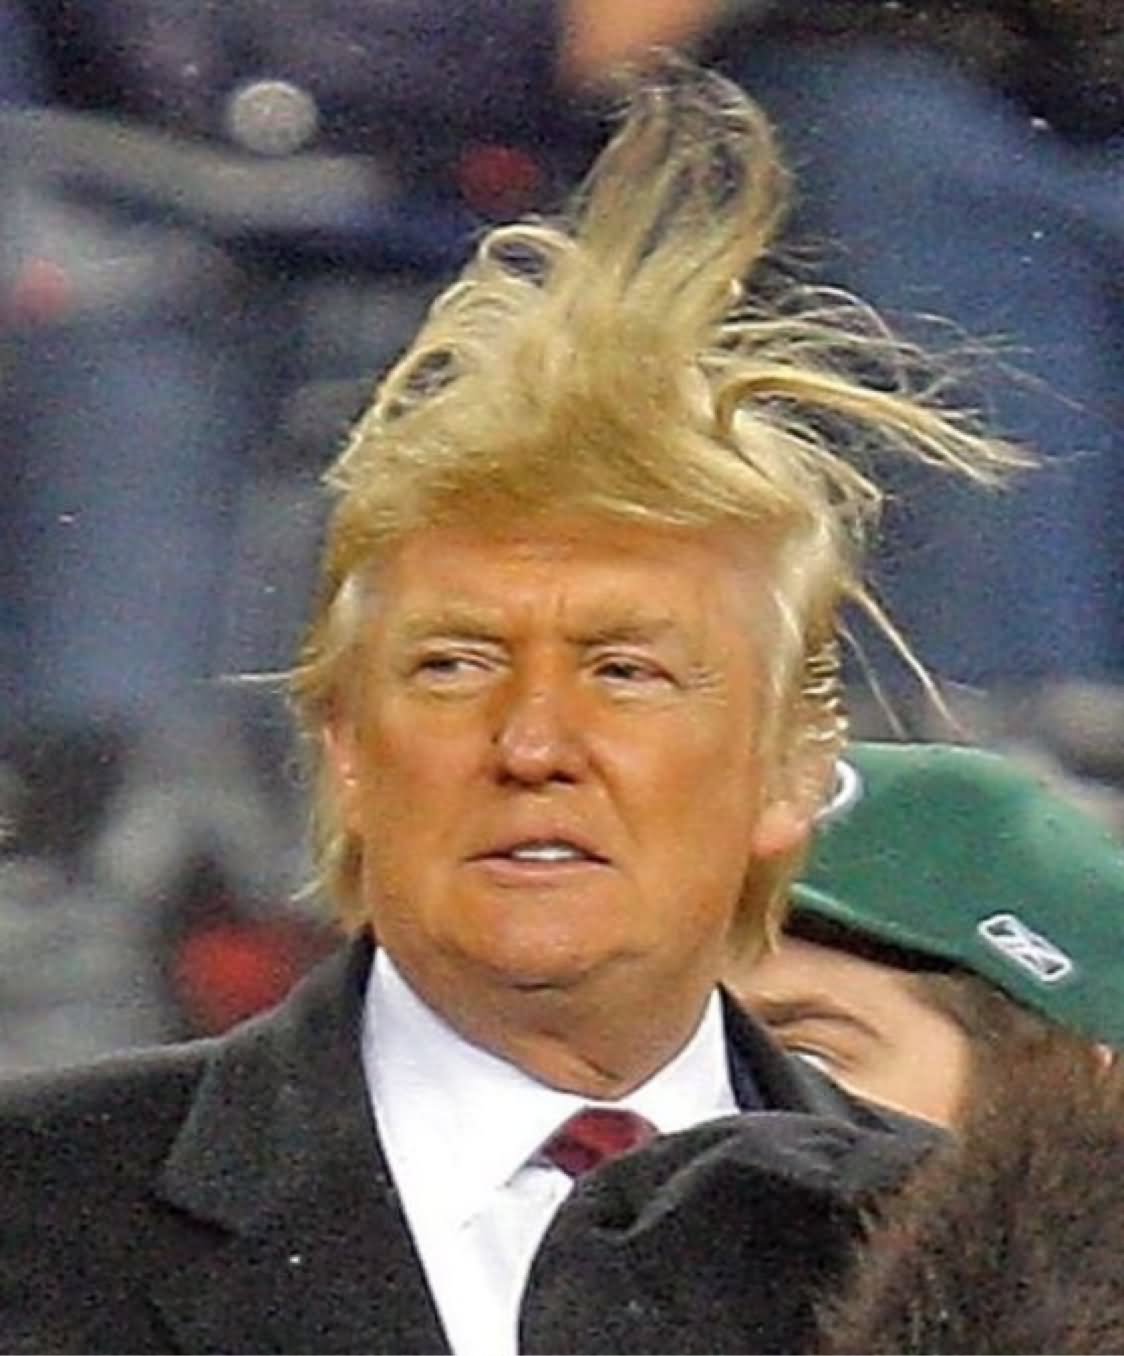 22 Donald Trump Funny Hair Pictures That Make You Laugh